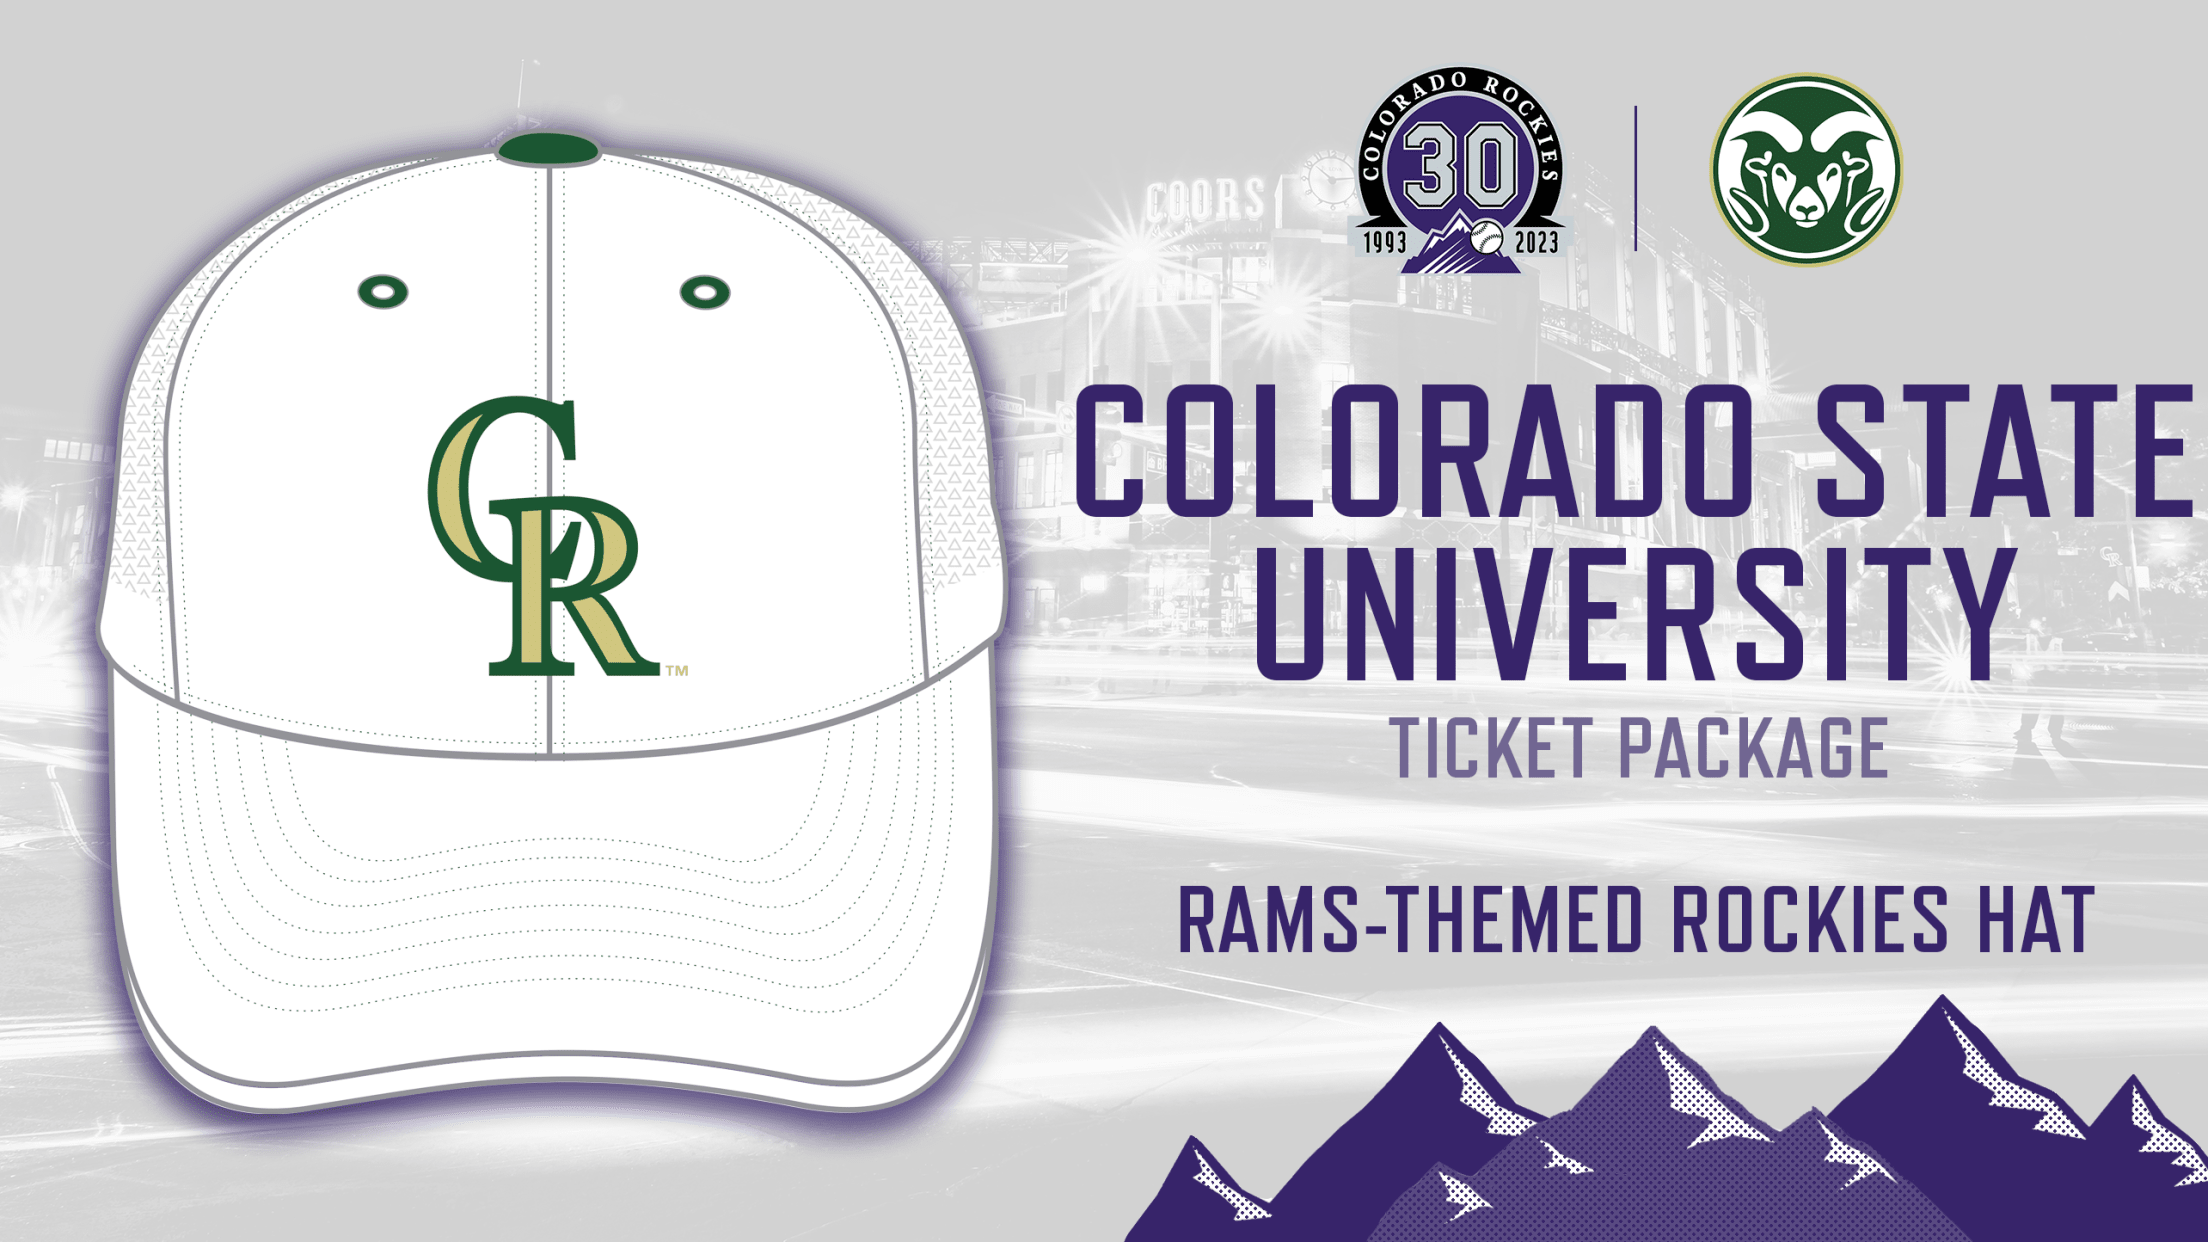 Colorado State University Ticket Package